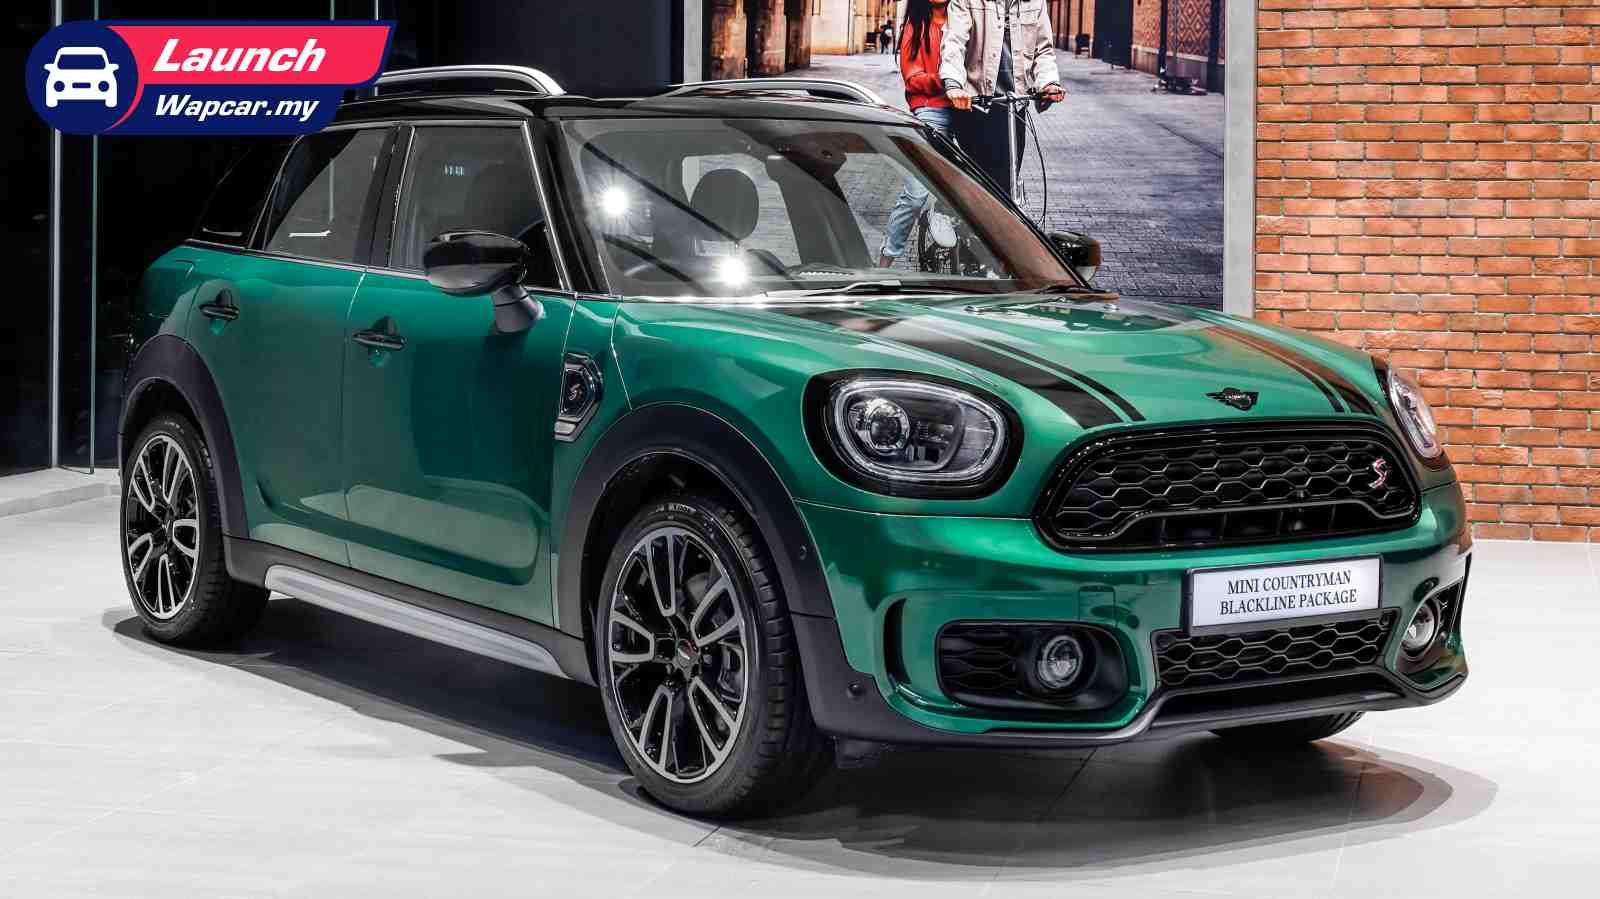 Fancy a MINI Countryman without chrome bits? Only 38 units available though 01